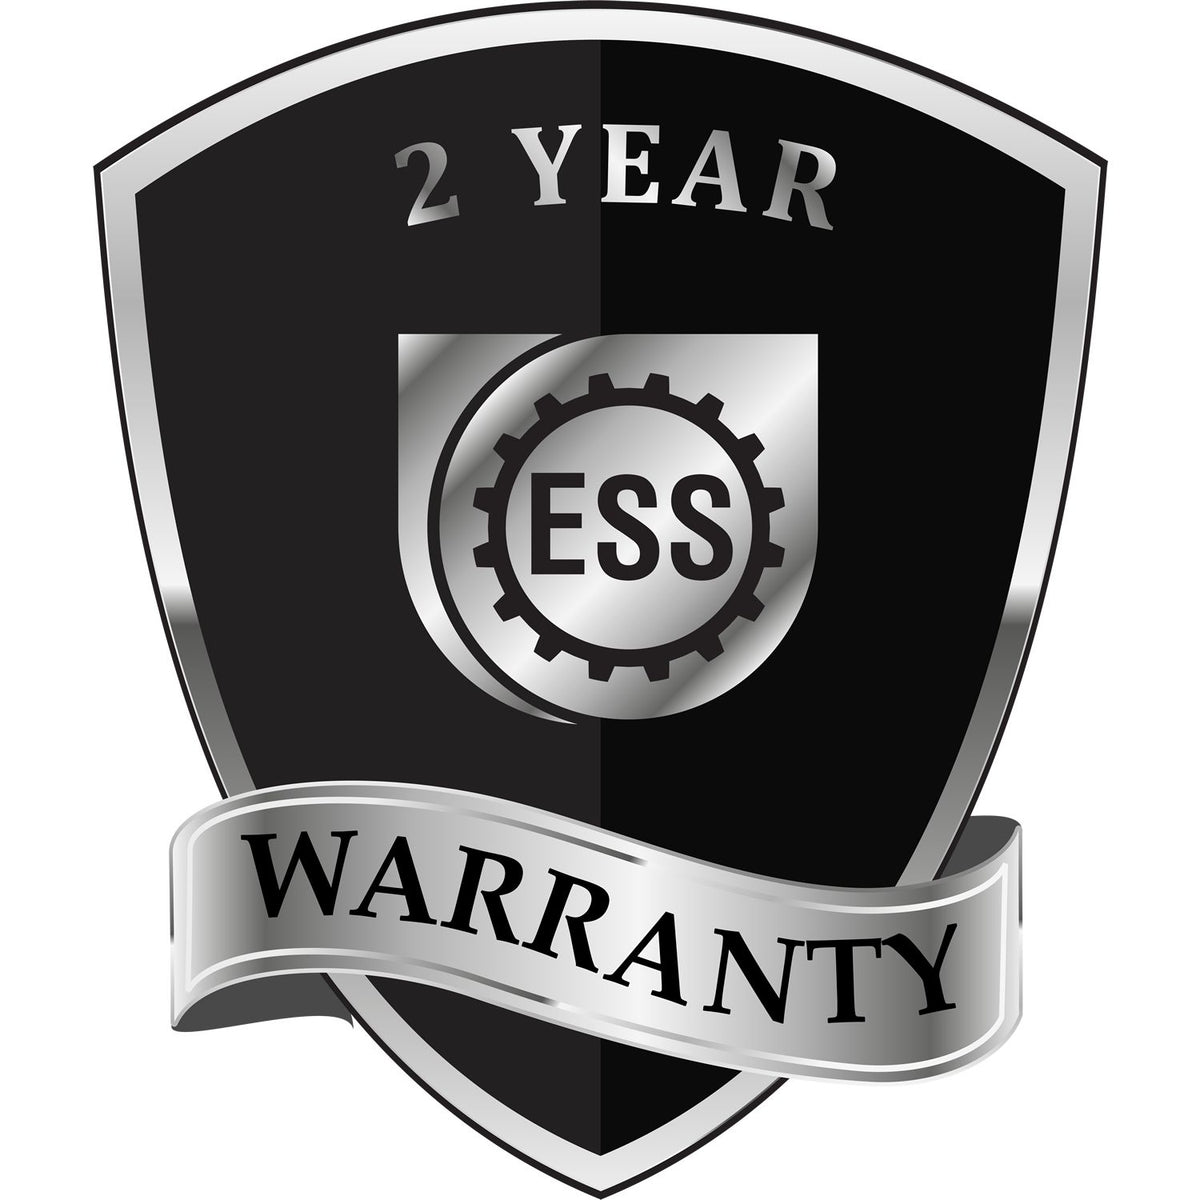 A black and silver badge or emblem showing warranty information for the Hybrid Kentucky Landscape Architect Seal